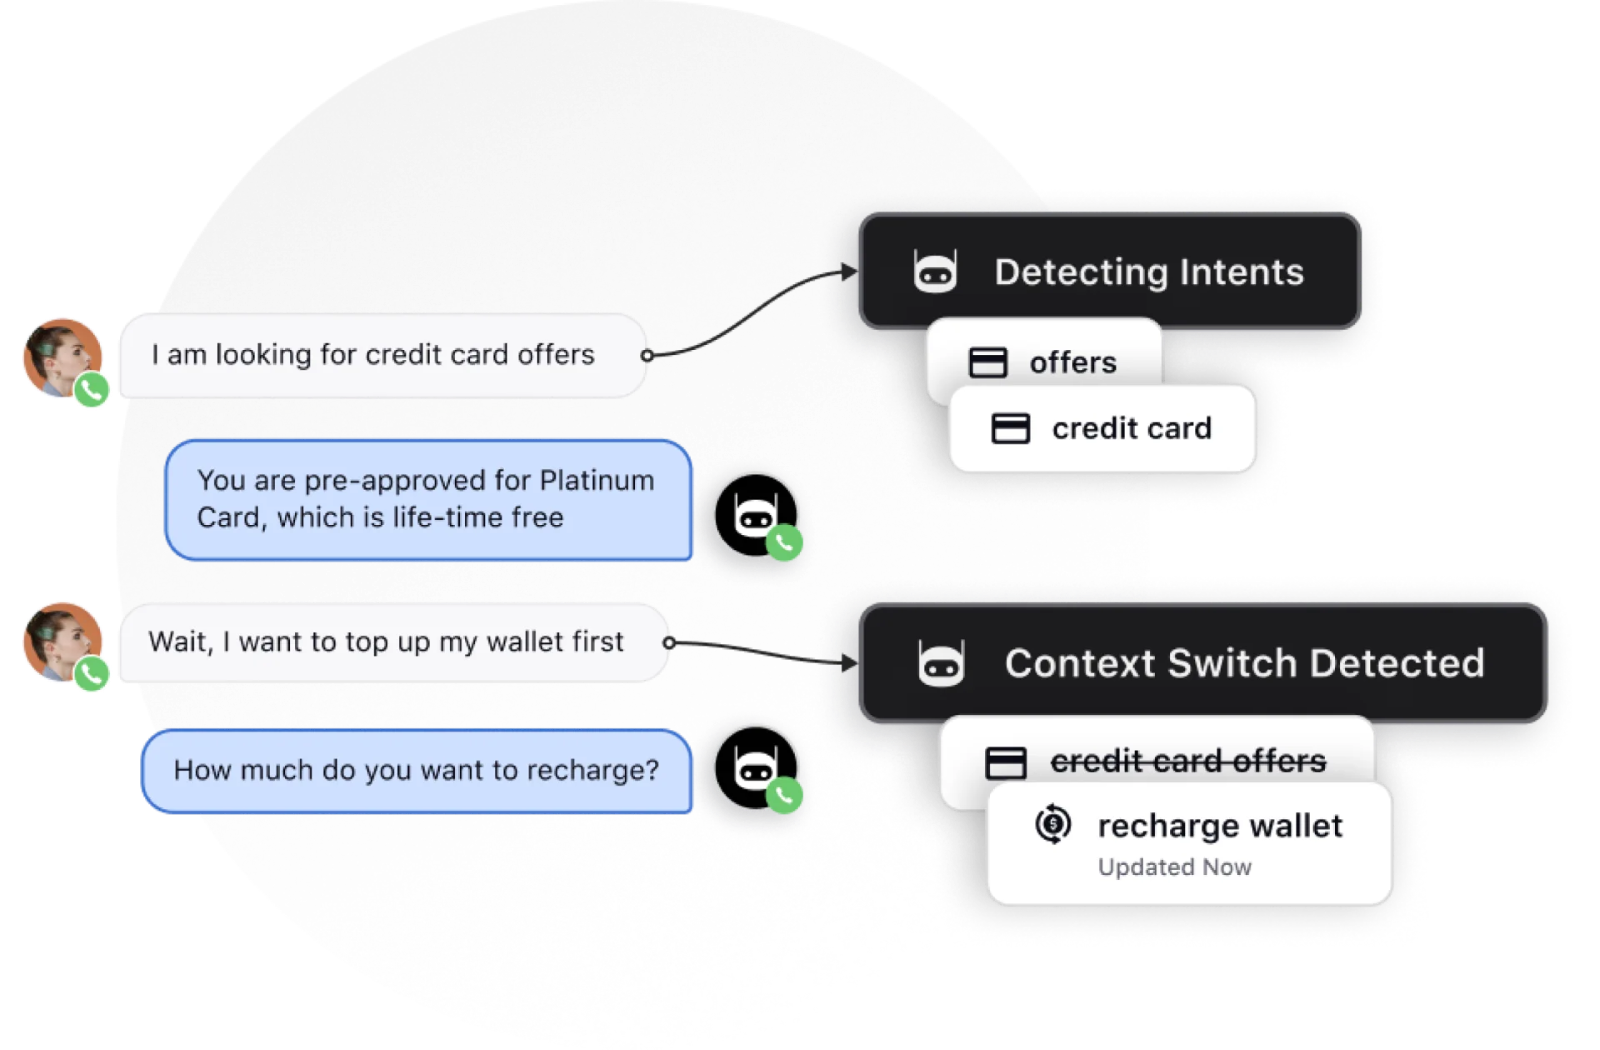 Sprinklr bot detects context and intent switch - customer service goal